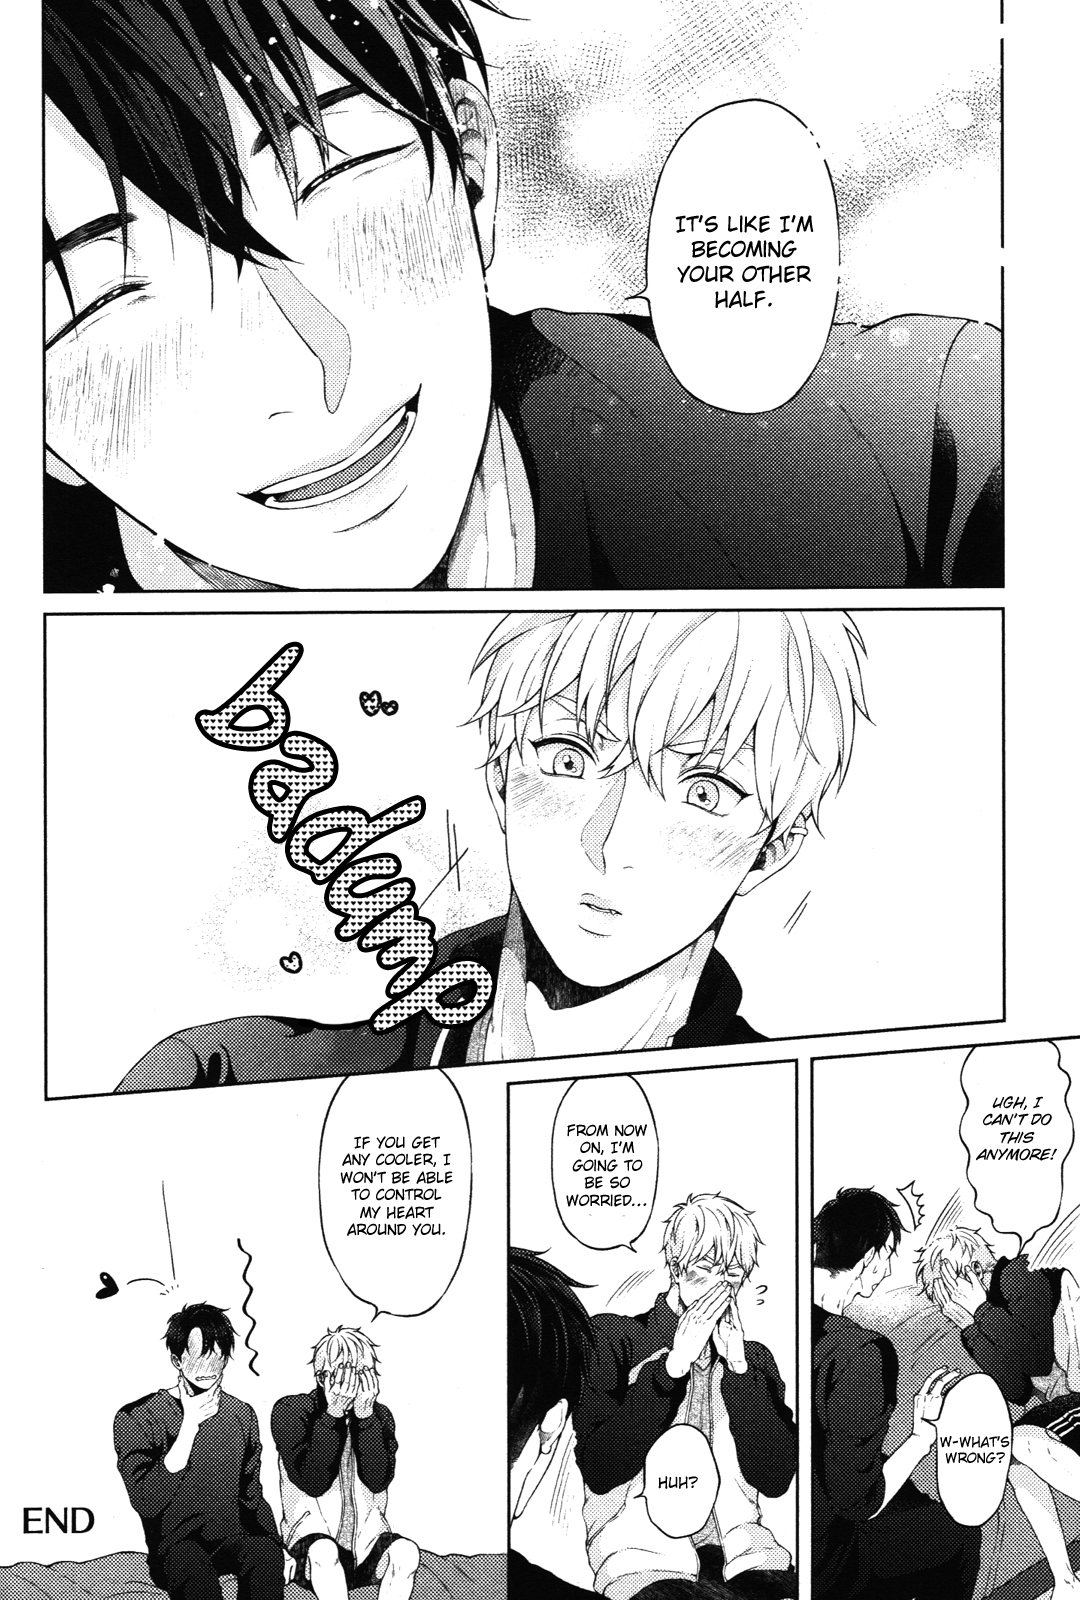 Kimi to no Dogfight Vol. 1 Ch. 7